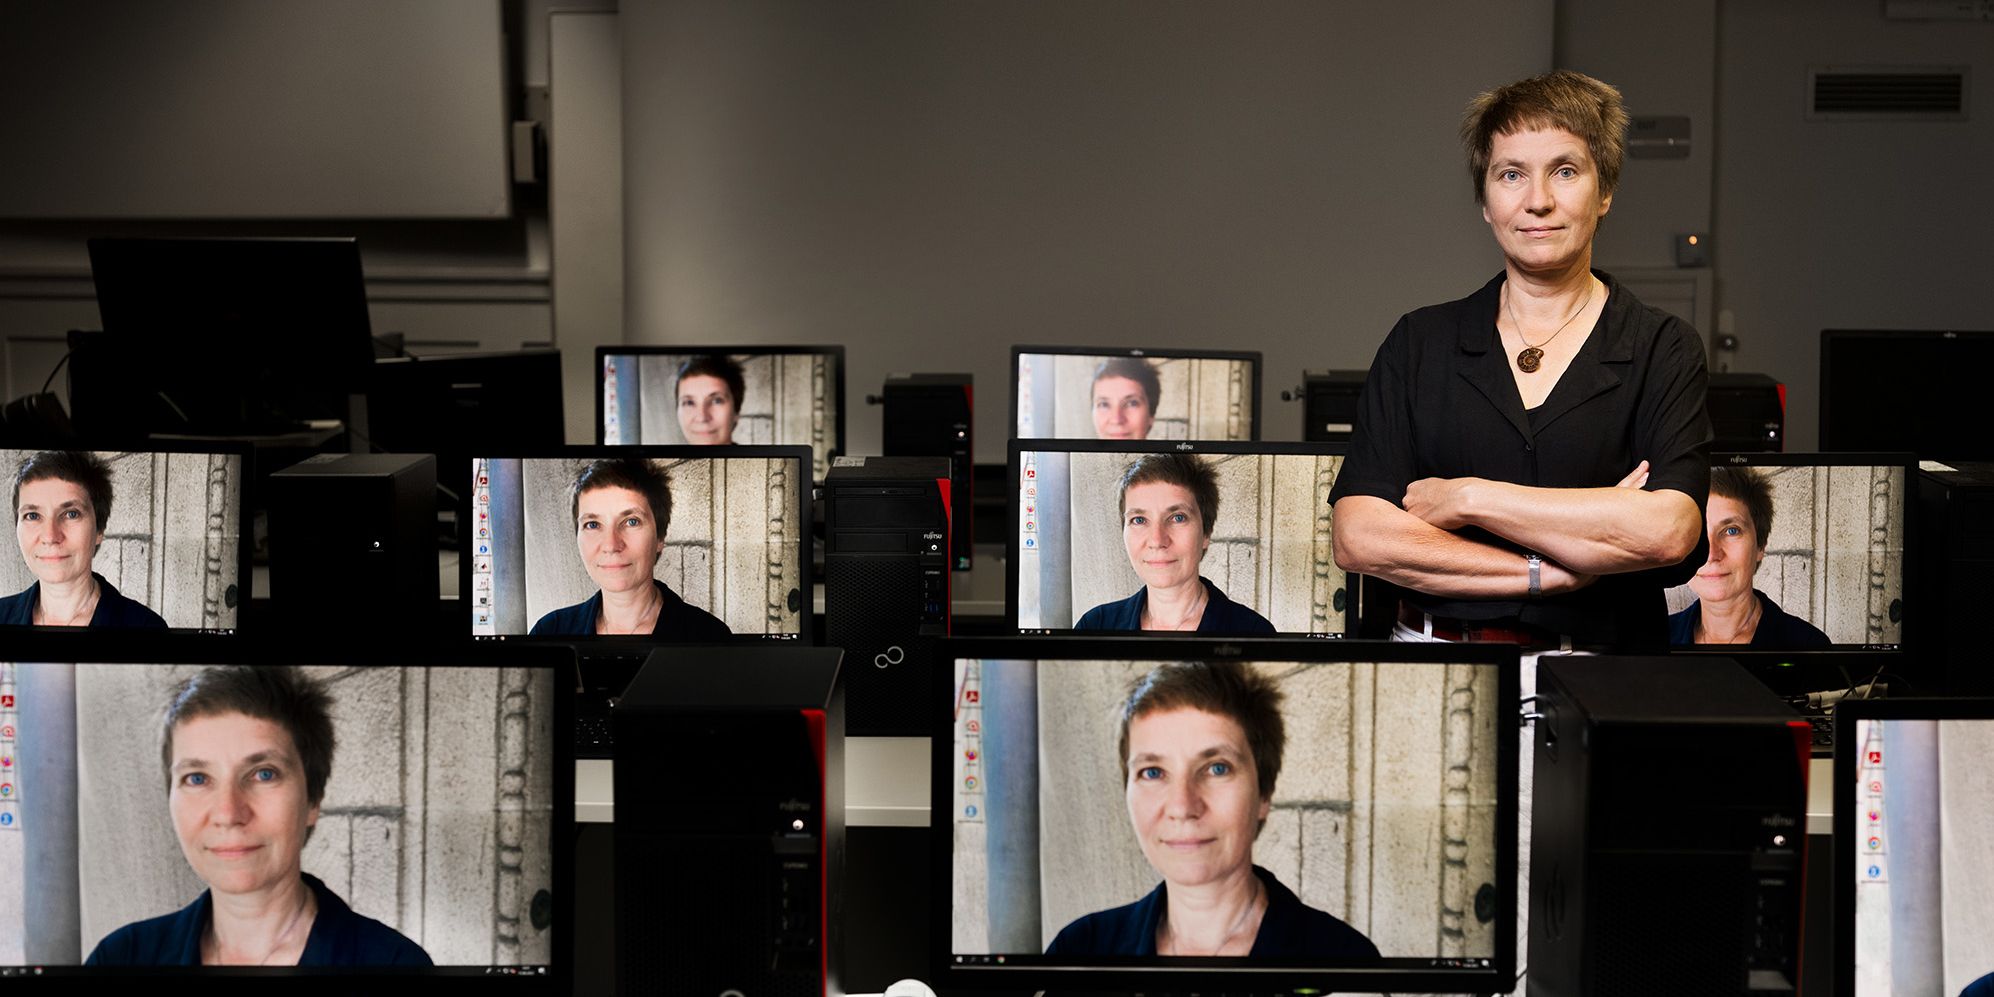 Photo of von Dr. Jessica Heesen, as well reflected on several screens.